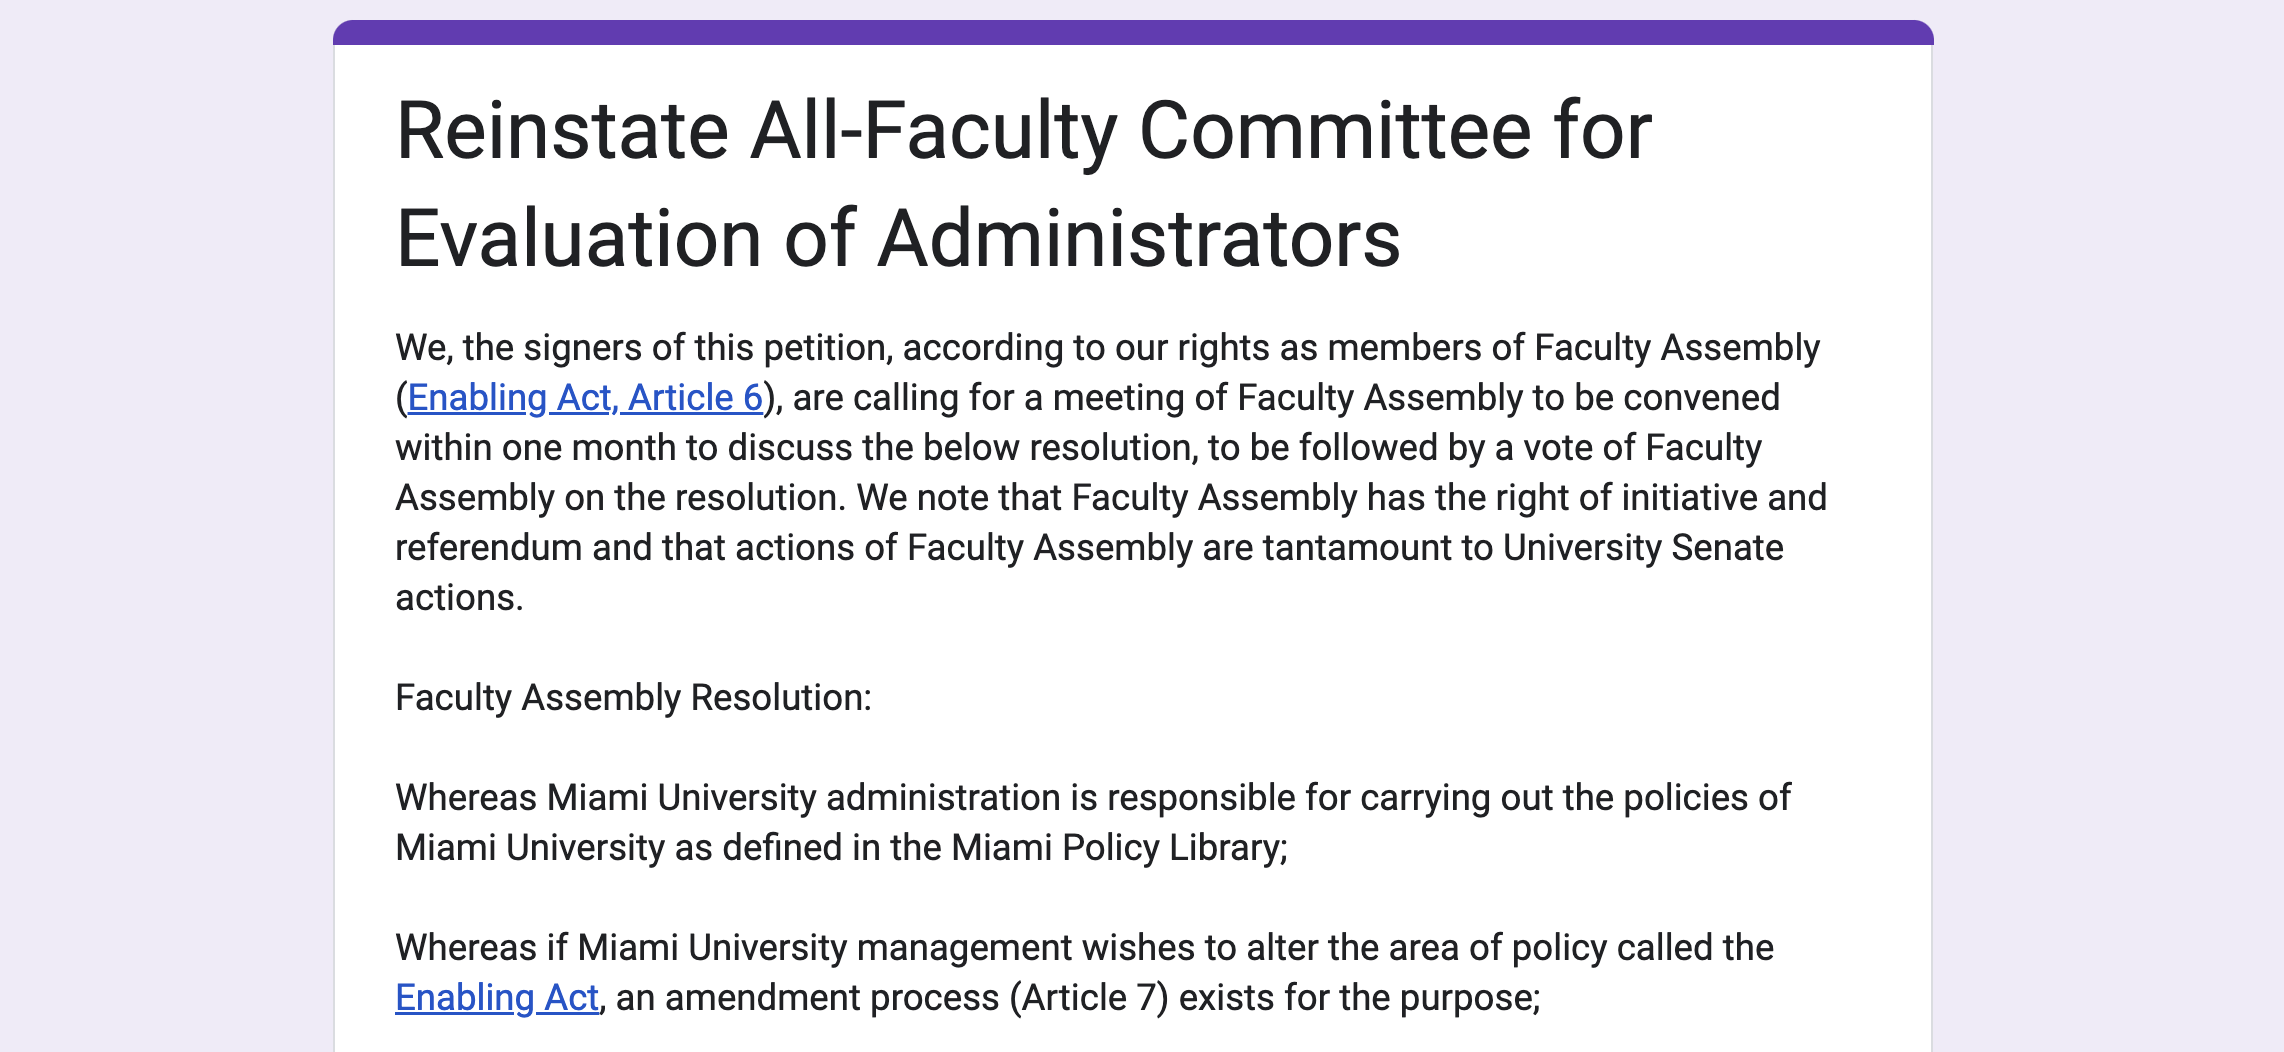 Image of online form titled "Petition to Reinstate All-Faculty Committee on Evaluation of Administrators"